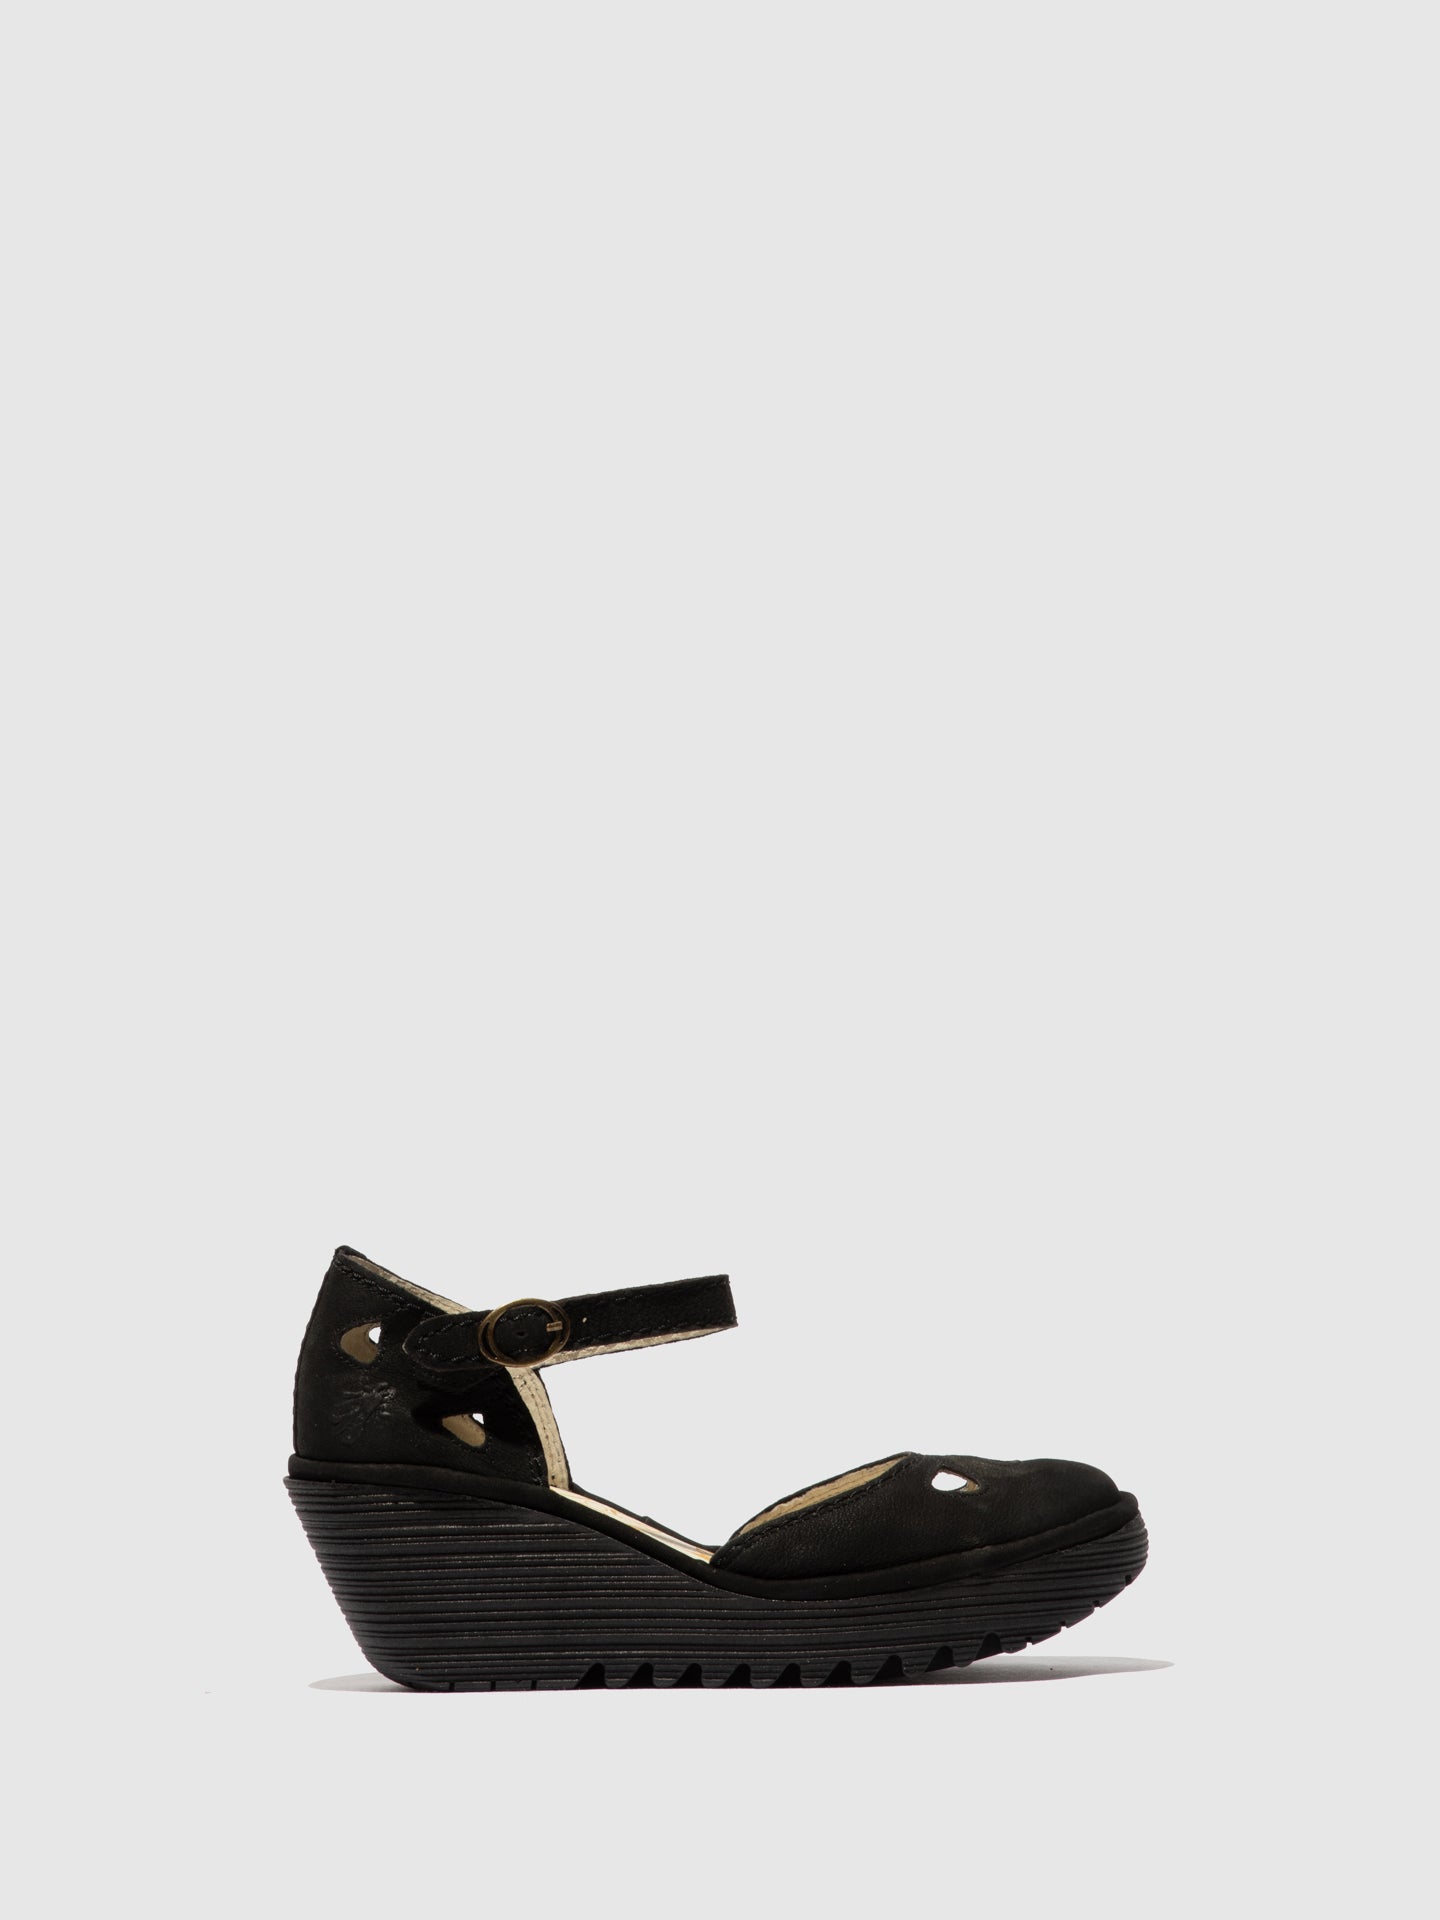 Fly London Black Wedge Sandals